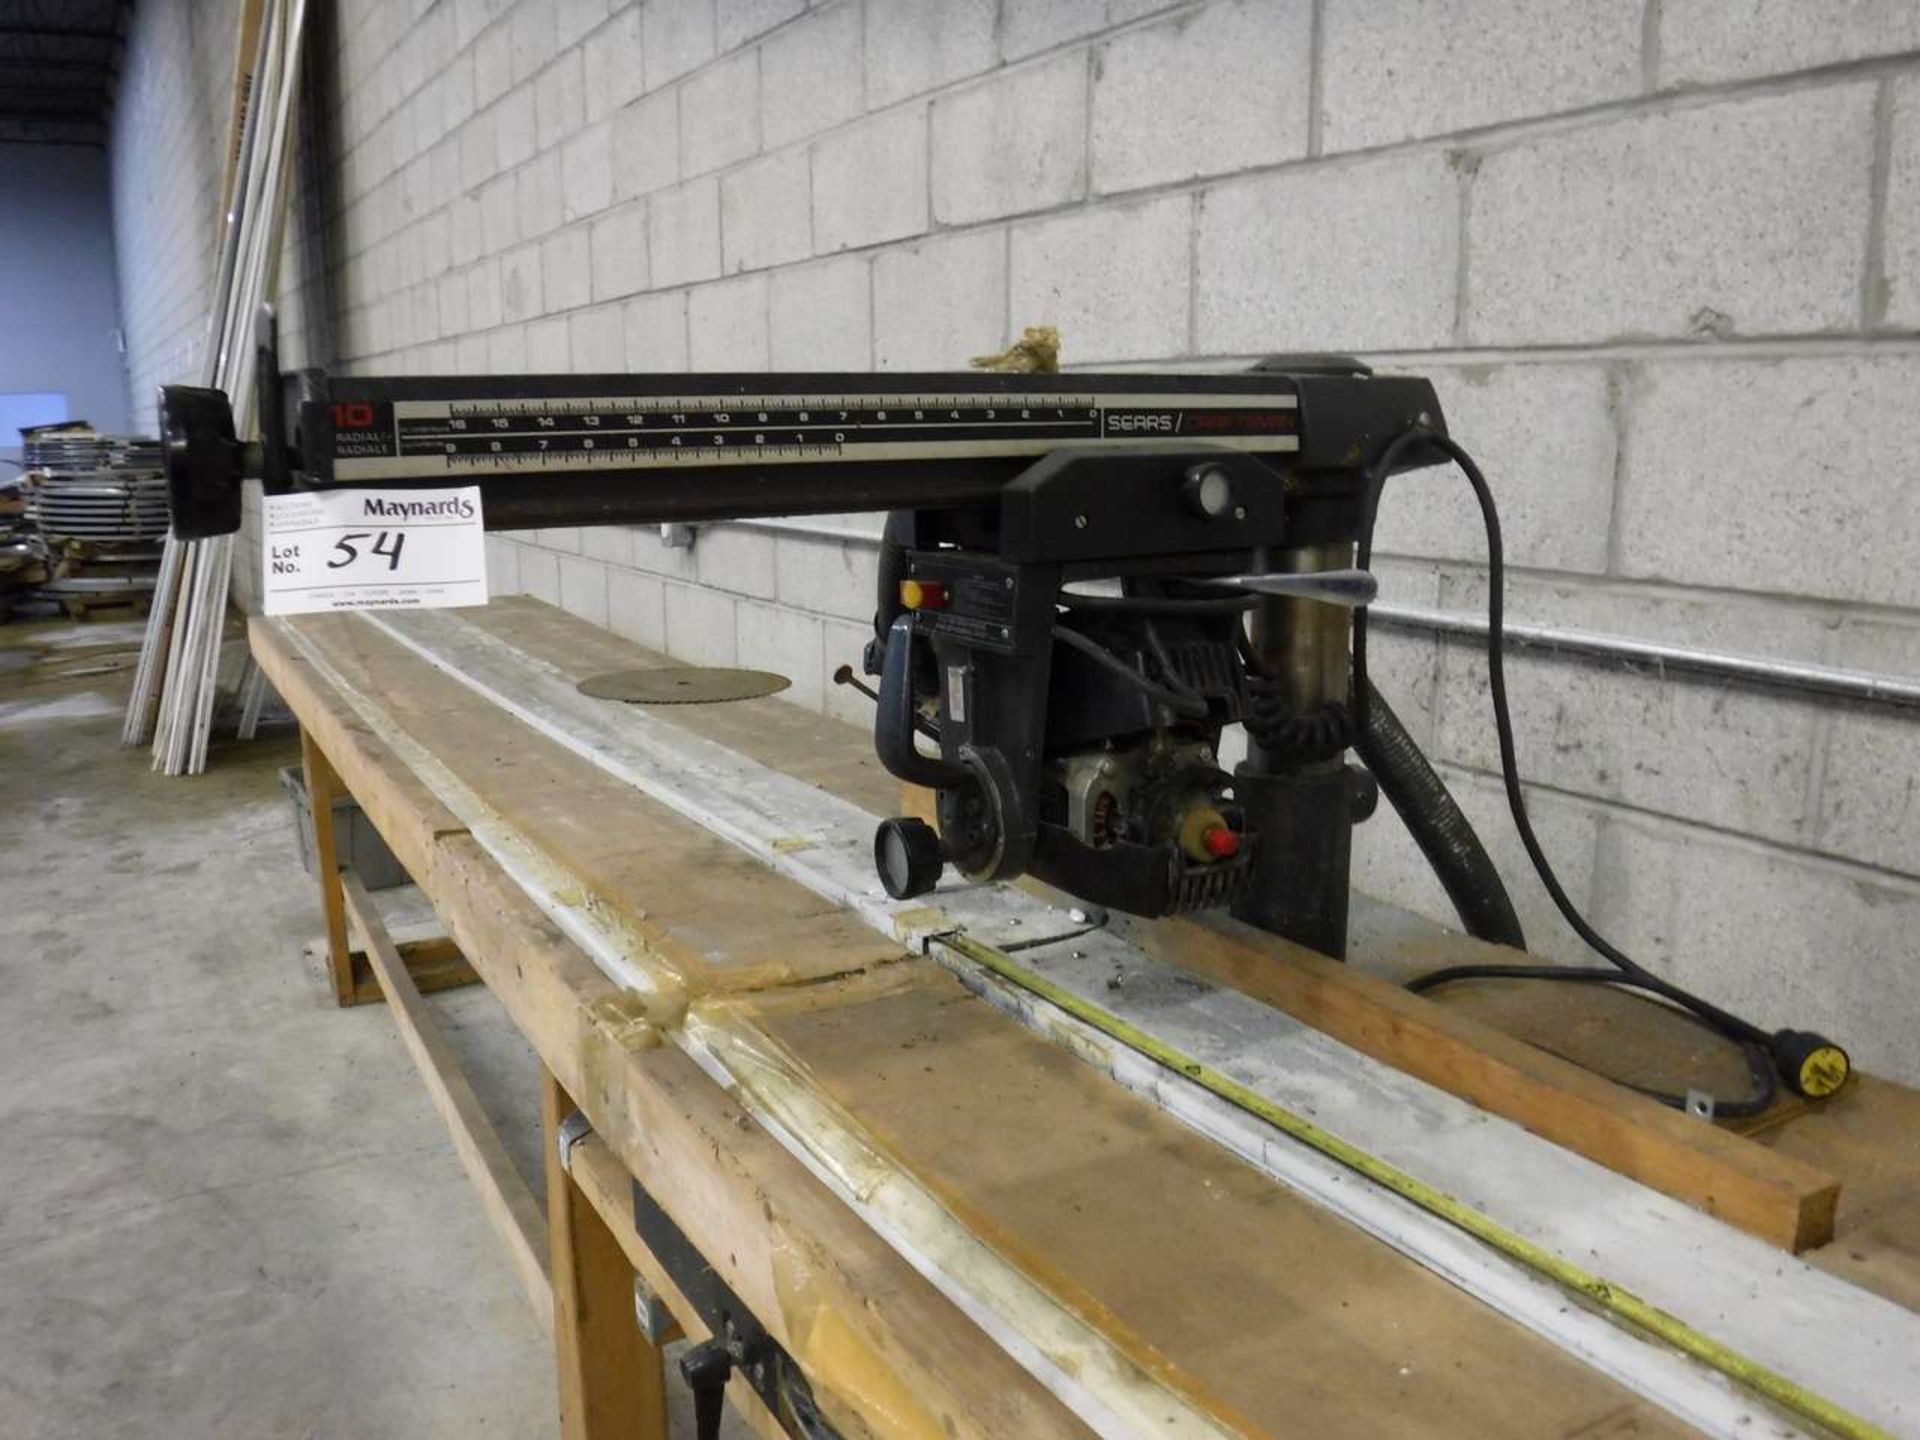 Sears Craftsman 113-23102C 10" Radial Arm Saw on Wooden Bench - Image 2 of 2